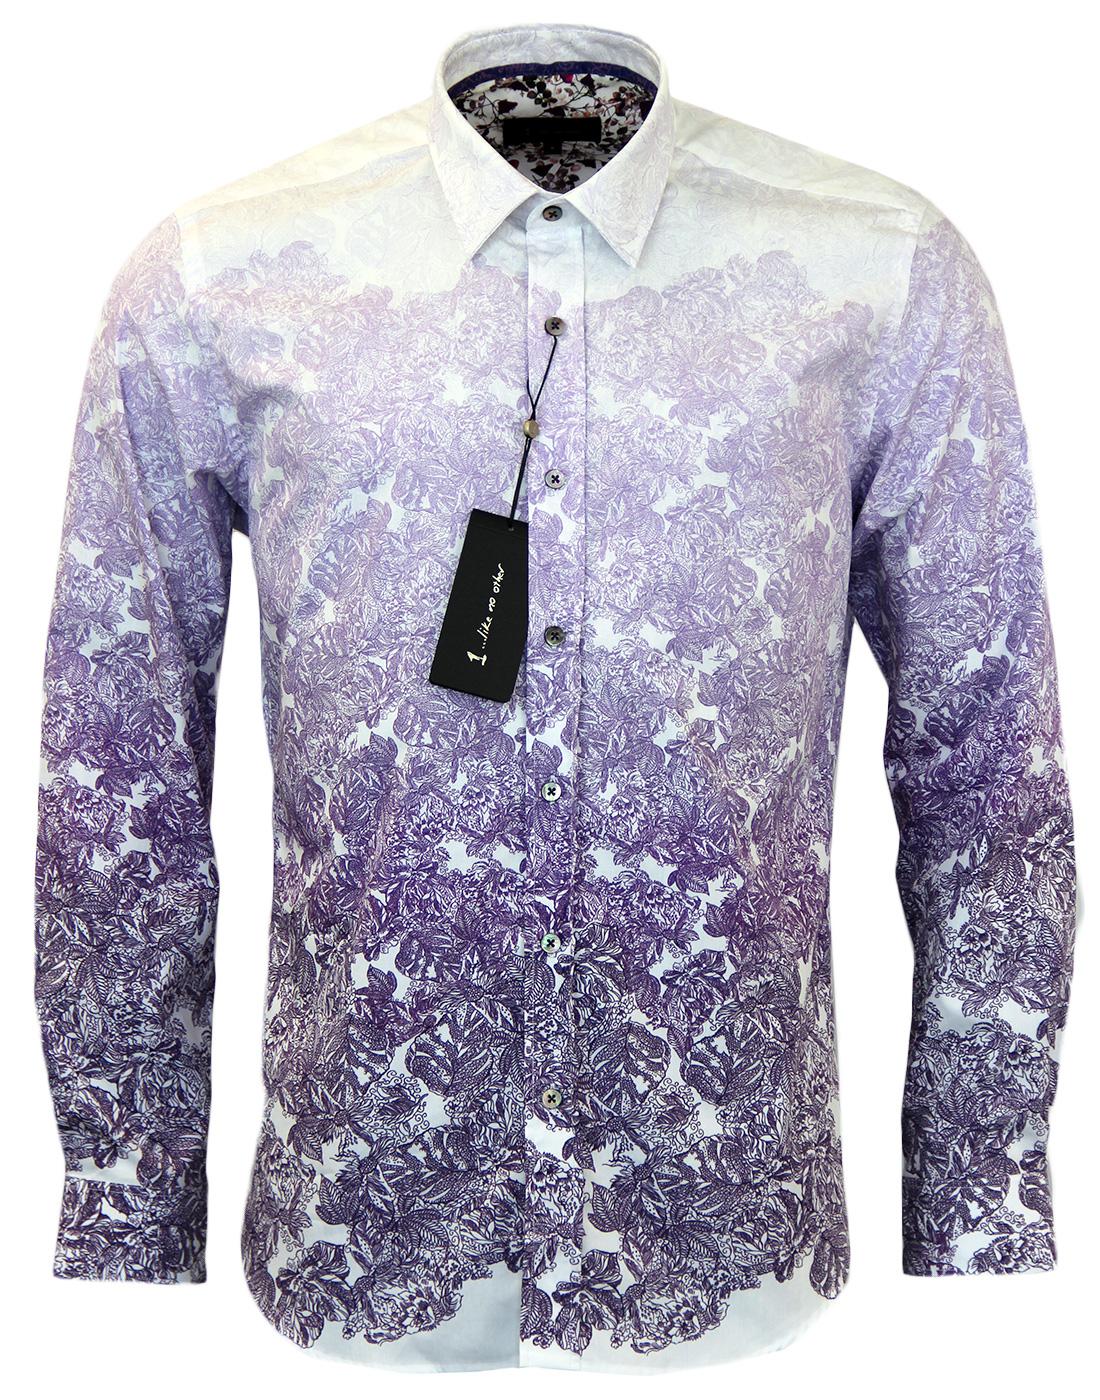 Voltage 1 LIKE NO OTHER Retro Fade Out Print Shirt